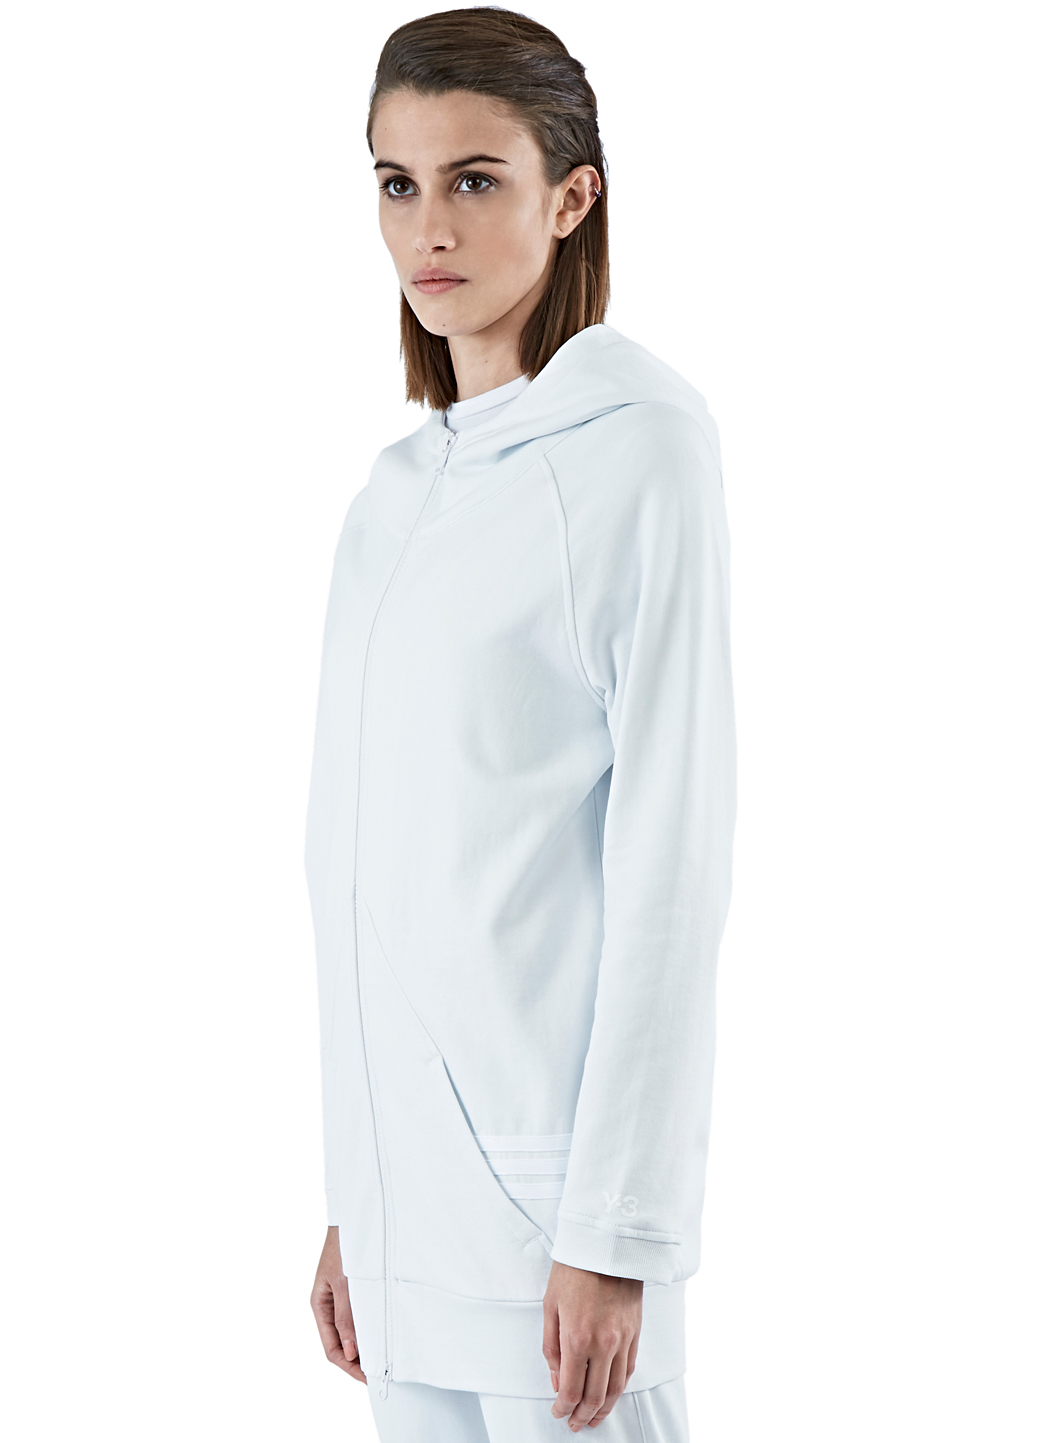 Remover hot white cardigan sweater with hood dress women online canada, Harley davidson dealership t shirts for sale, are satin wedding dresses in style. 